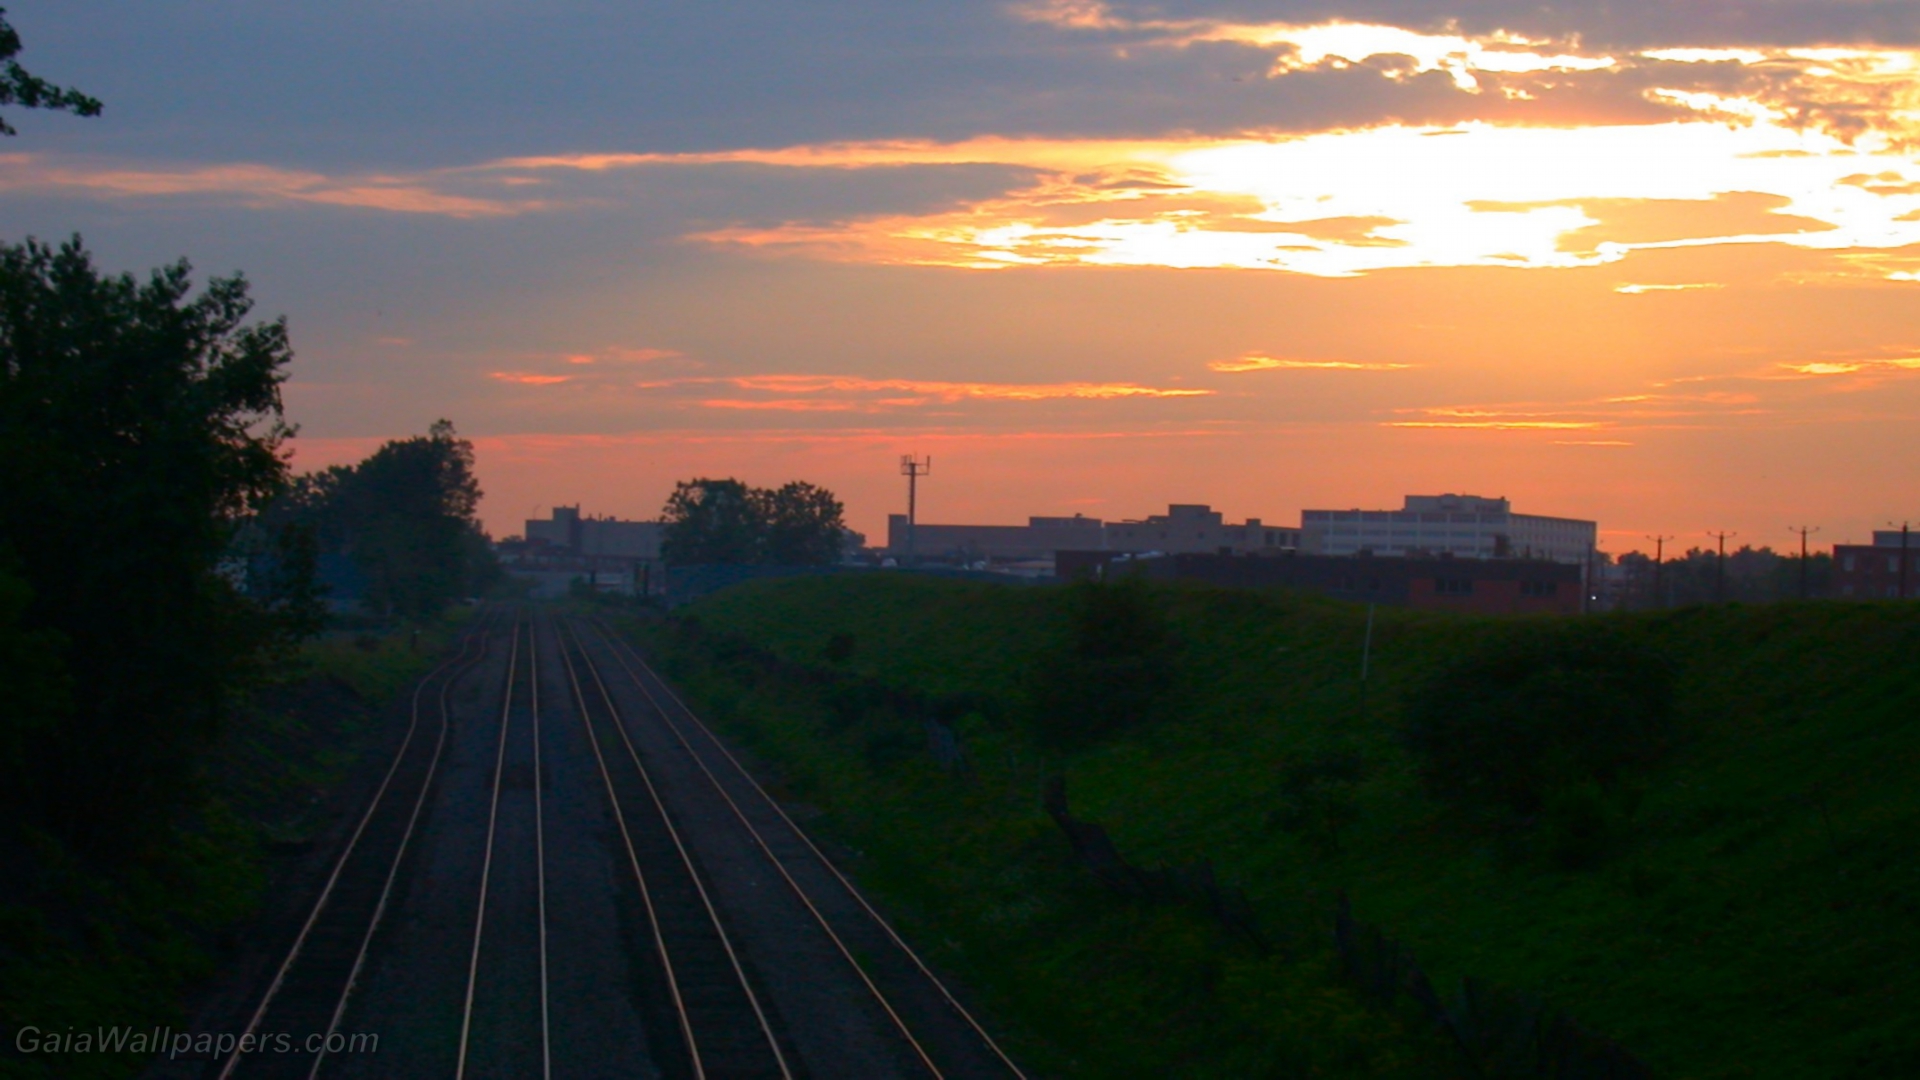 Sunset over the railroads - Free desktop wallpapers